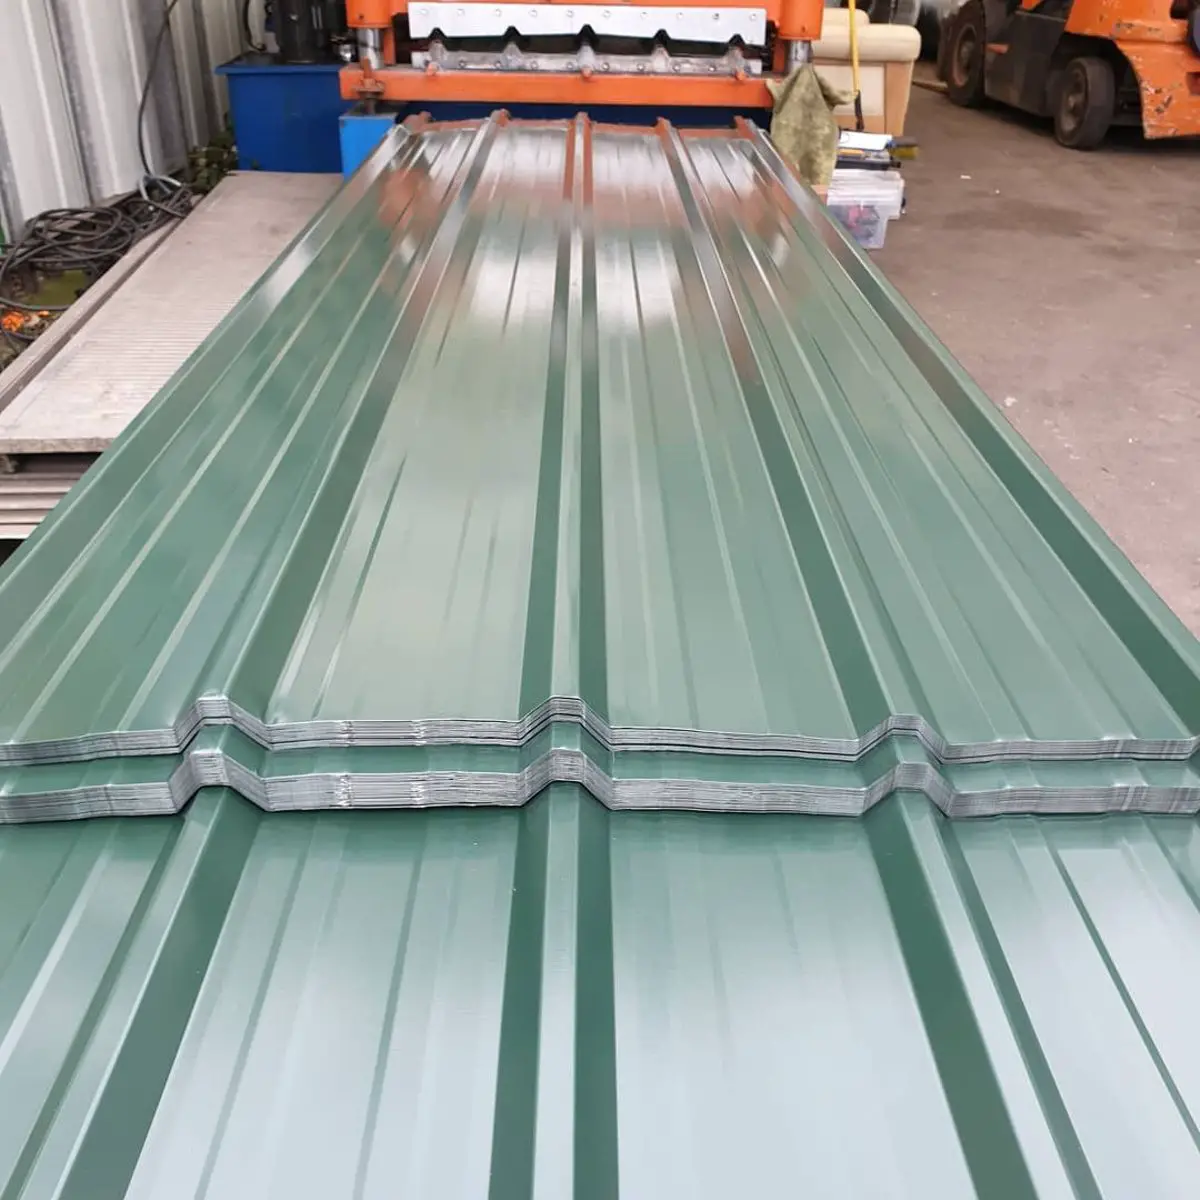 Metal roofing sheets in DE14 Staffordshire for £6.70 for ...